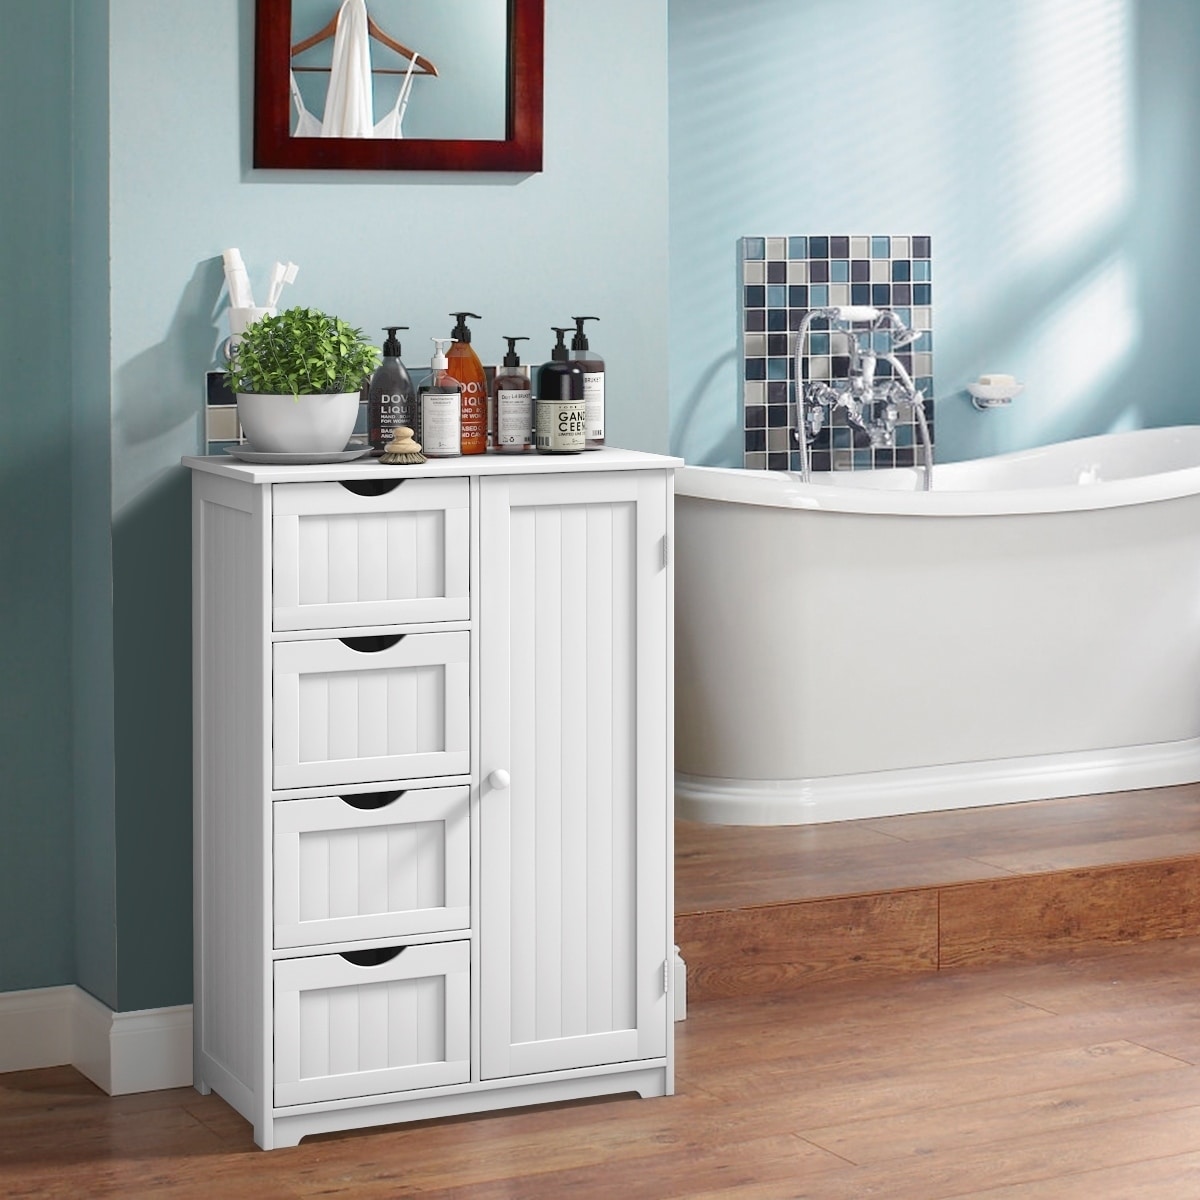 White Wooden Bathroom Cabinets High Gloss Finish Free Standing Cupboards 